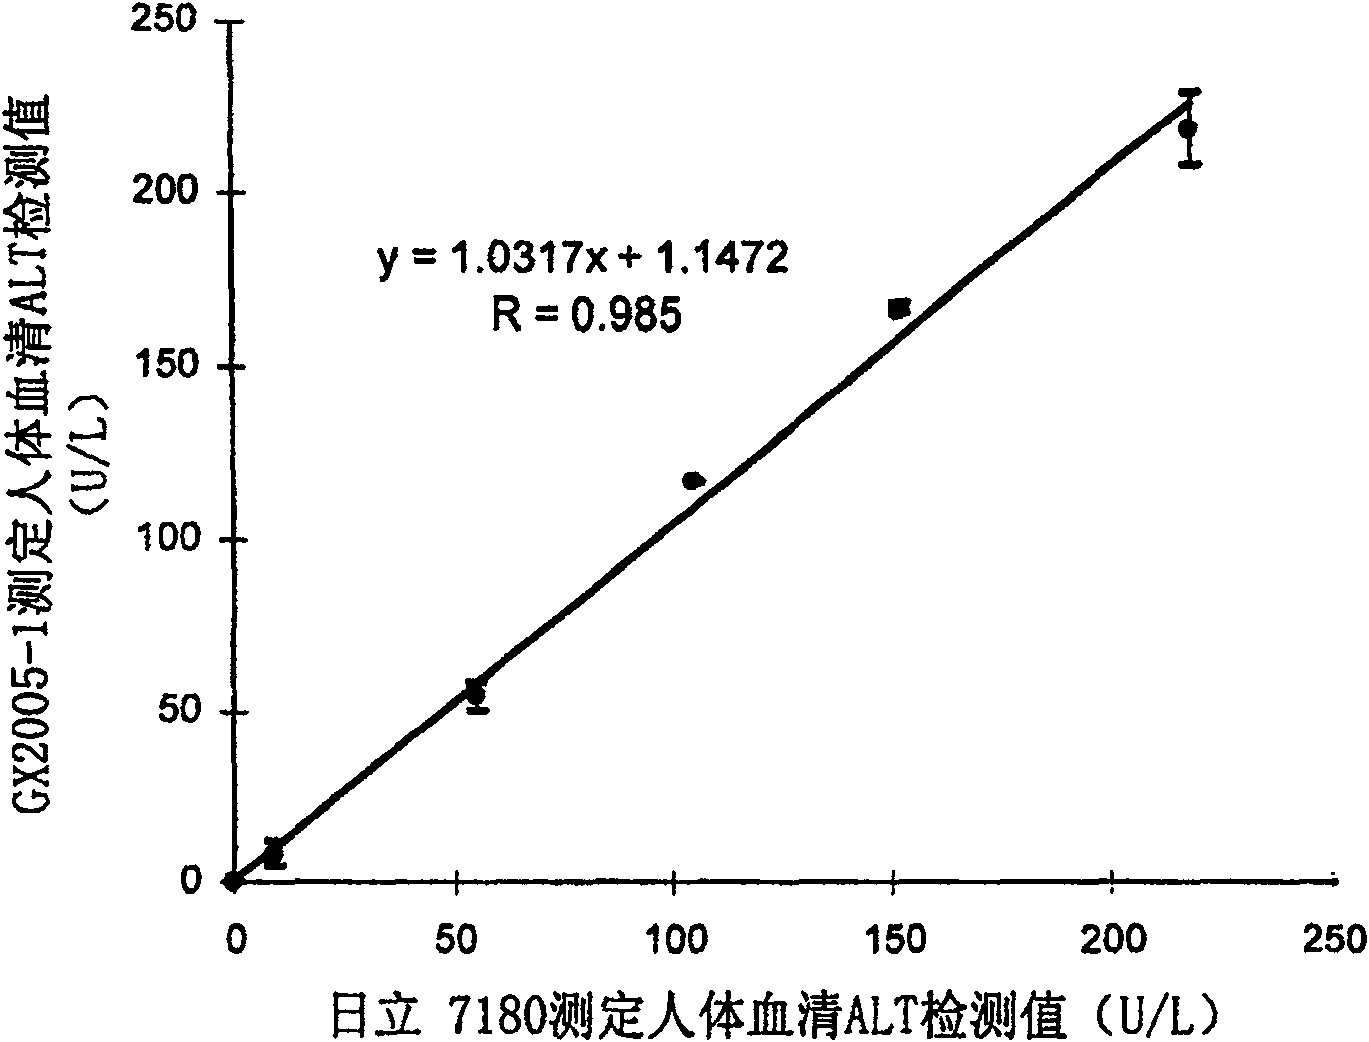 Reagent formula for fastly inspecting glutamic-pyruvic transaminase by optical method